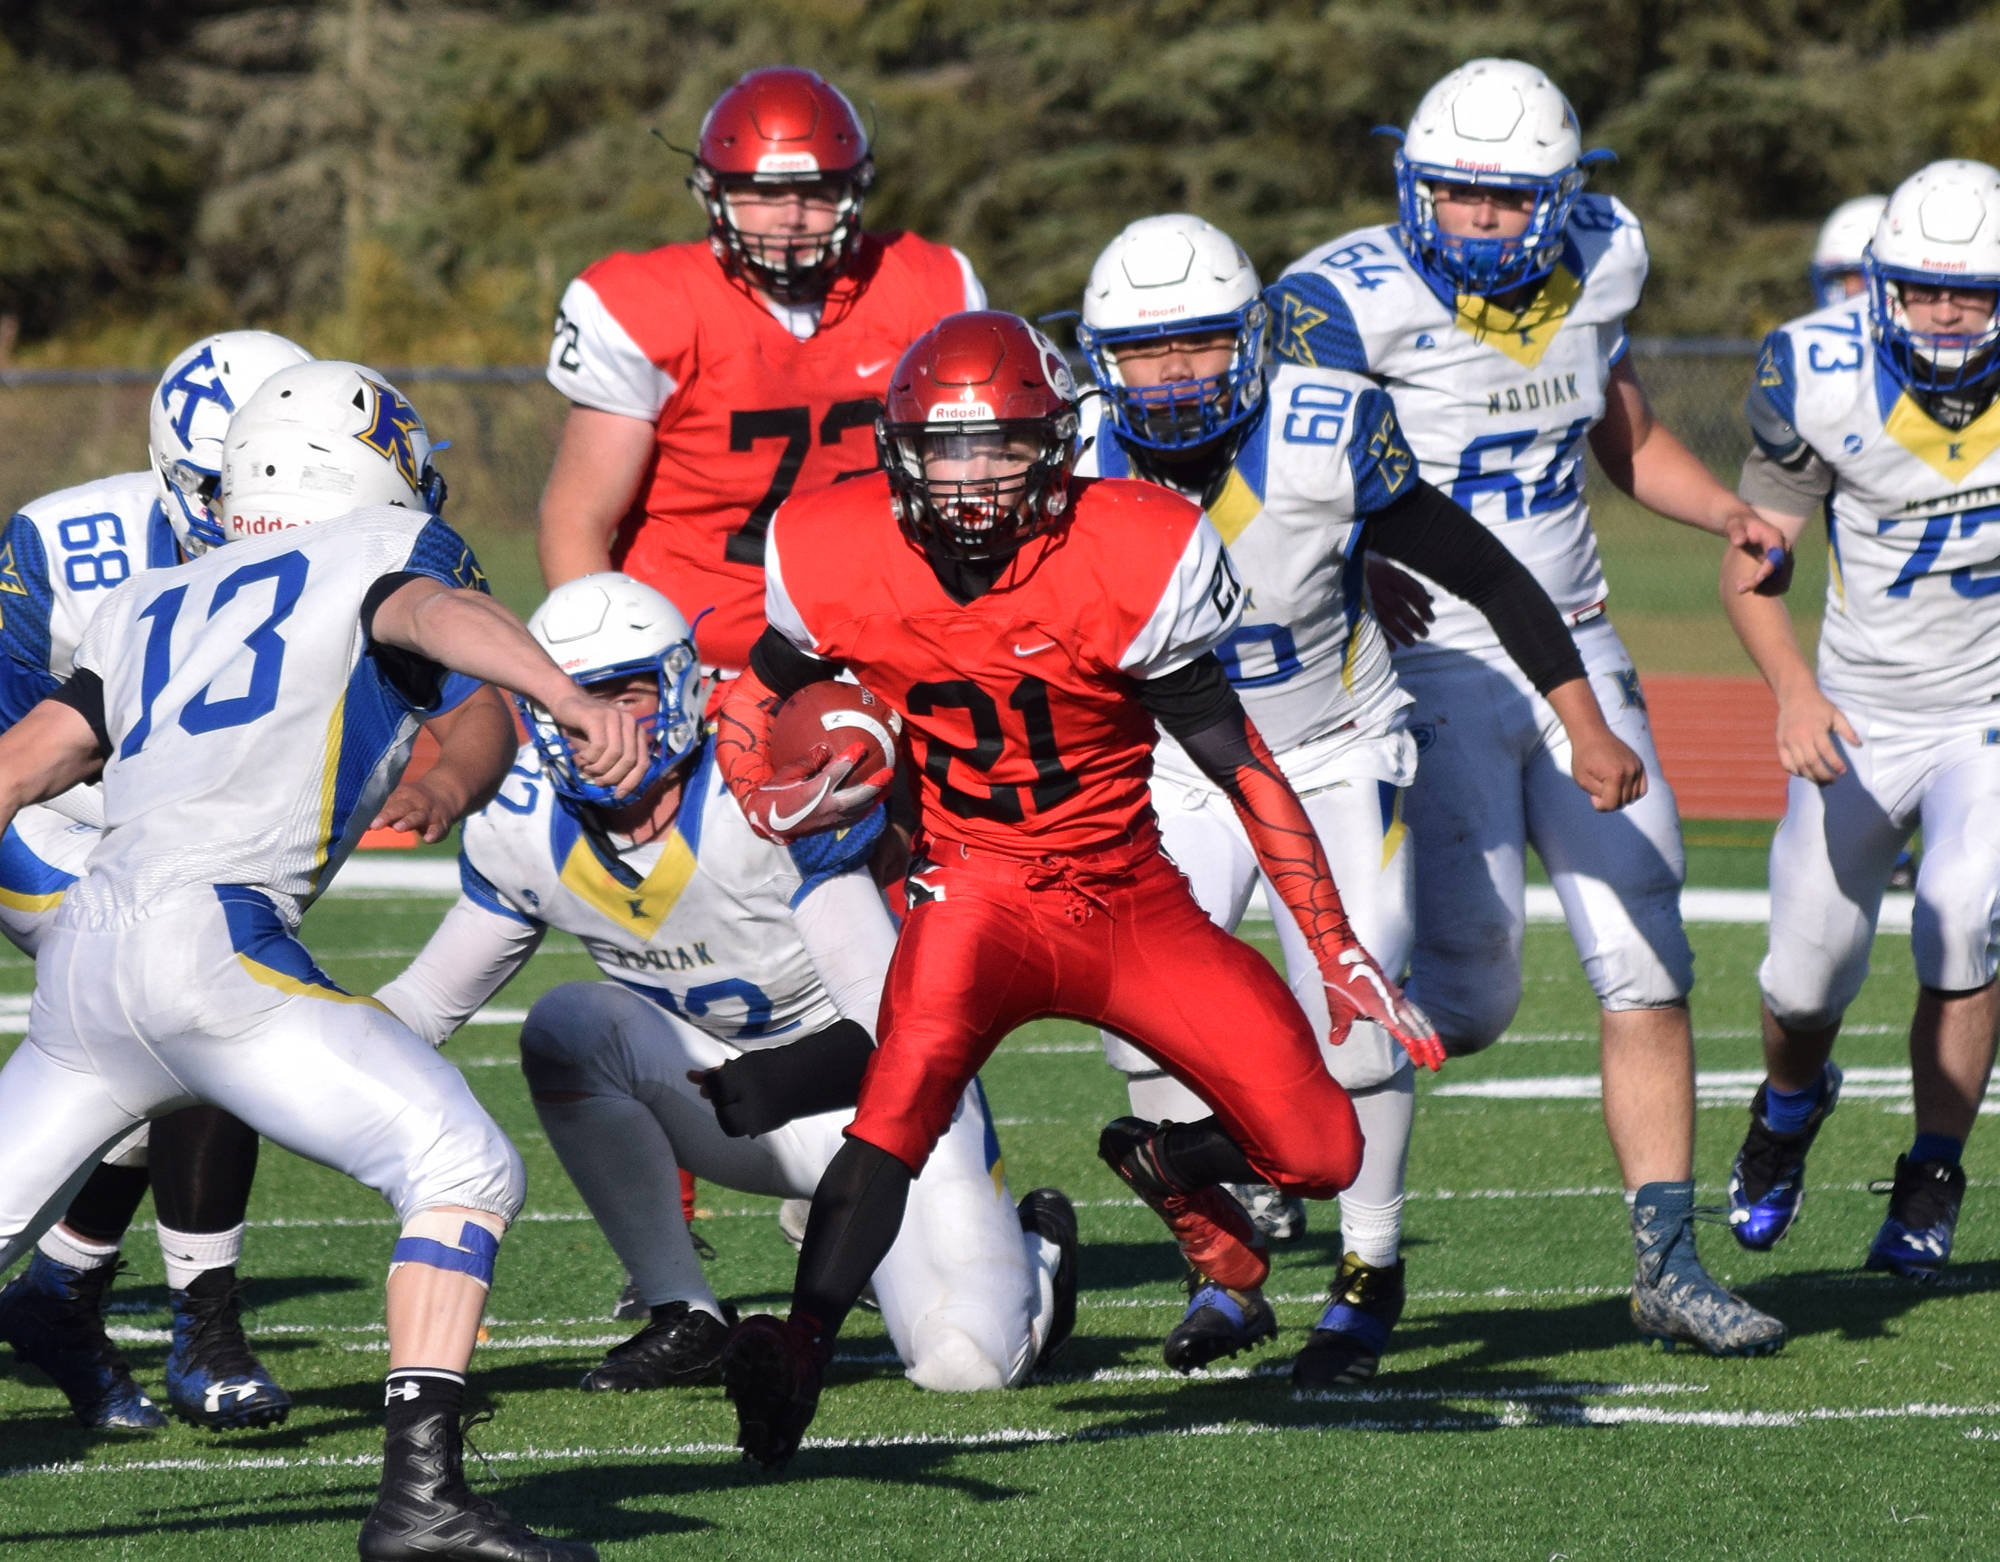 Kenai’s Zach Burnett (21) finds an opening in the defense Saturday afternoon against Kodiak at Kenai’s Ed Hollier Field. (Photo by Joey Klecka/Peninsula Clarion)